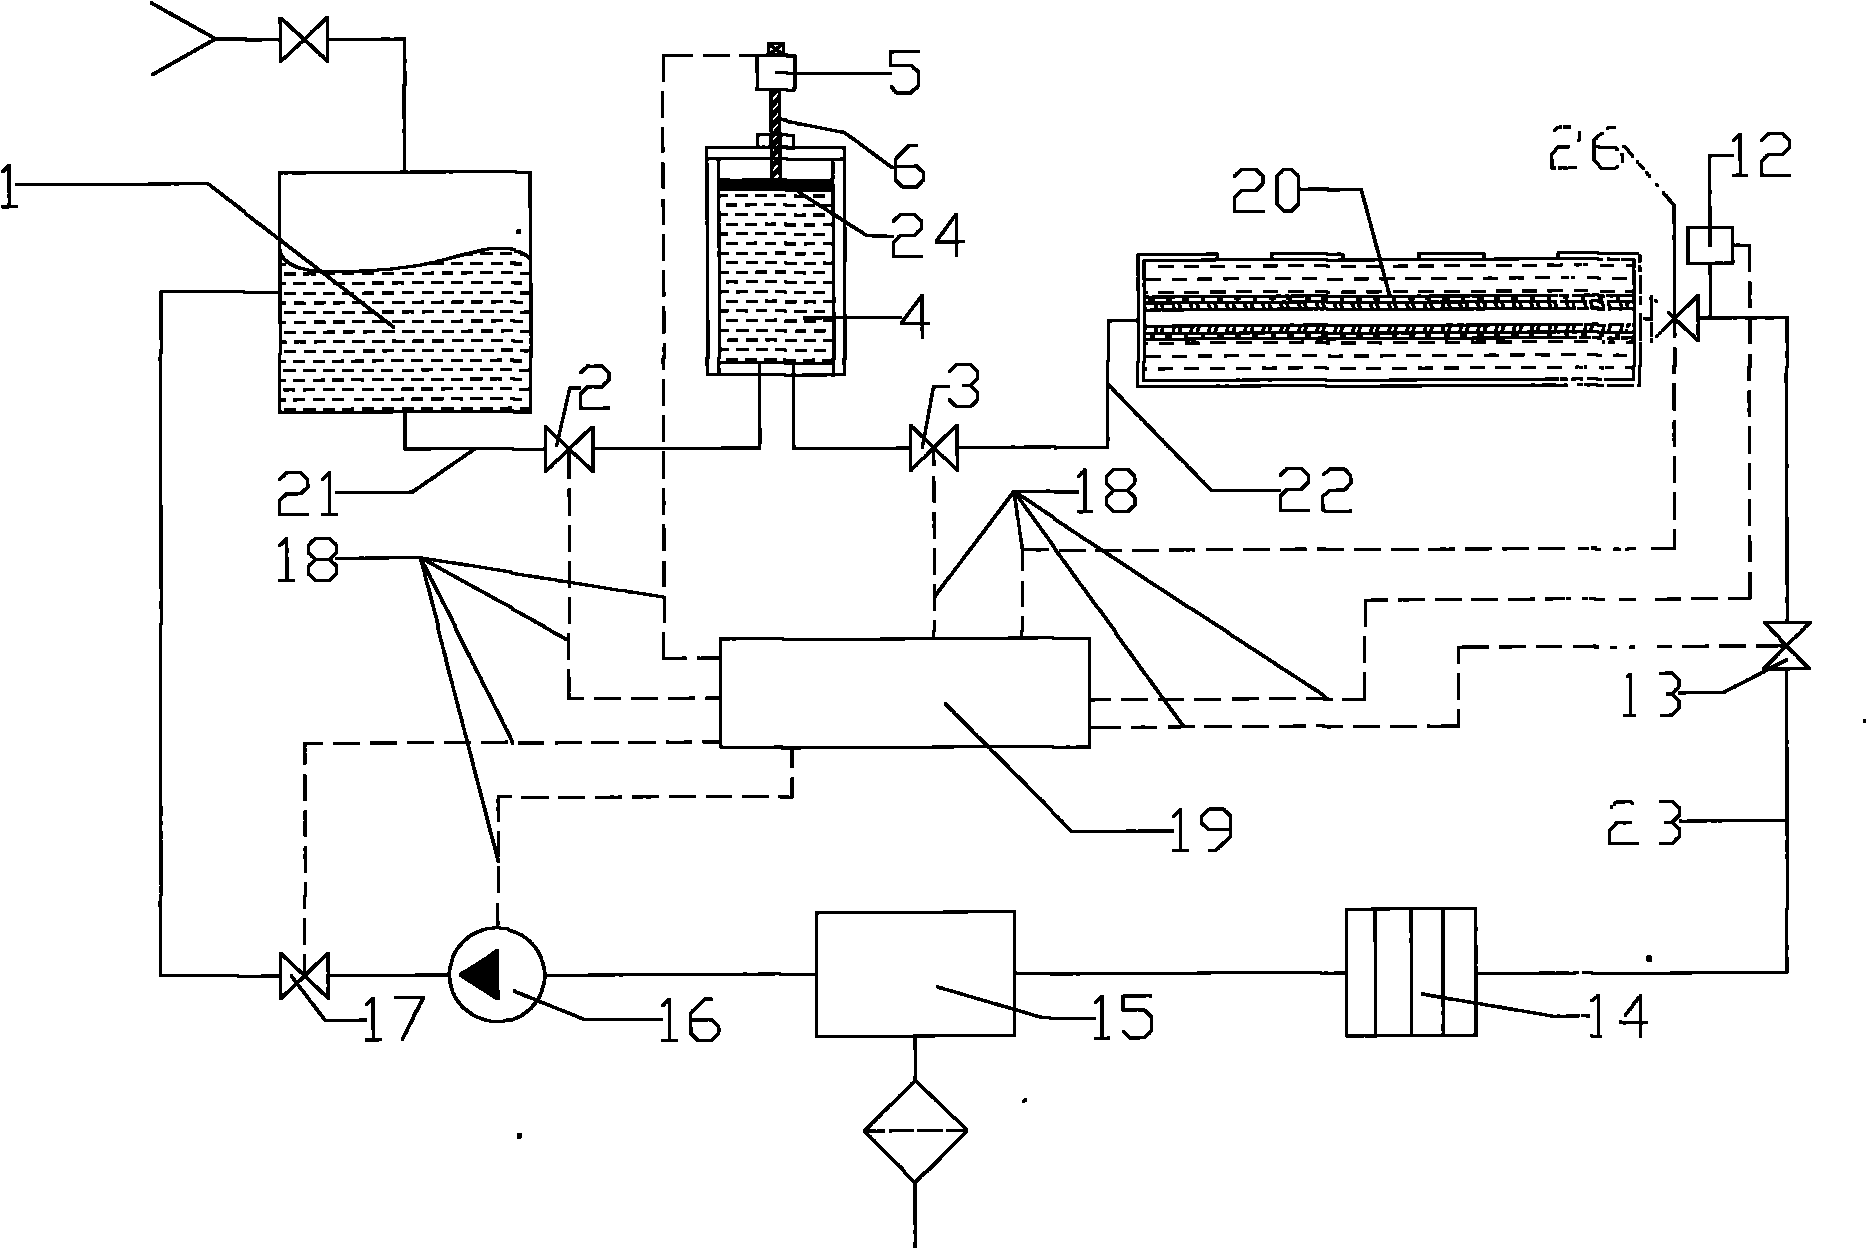 Water content supply device for vegetable culture under spacial microgravity